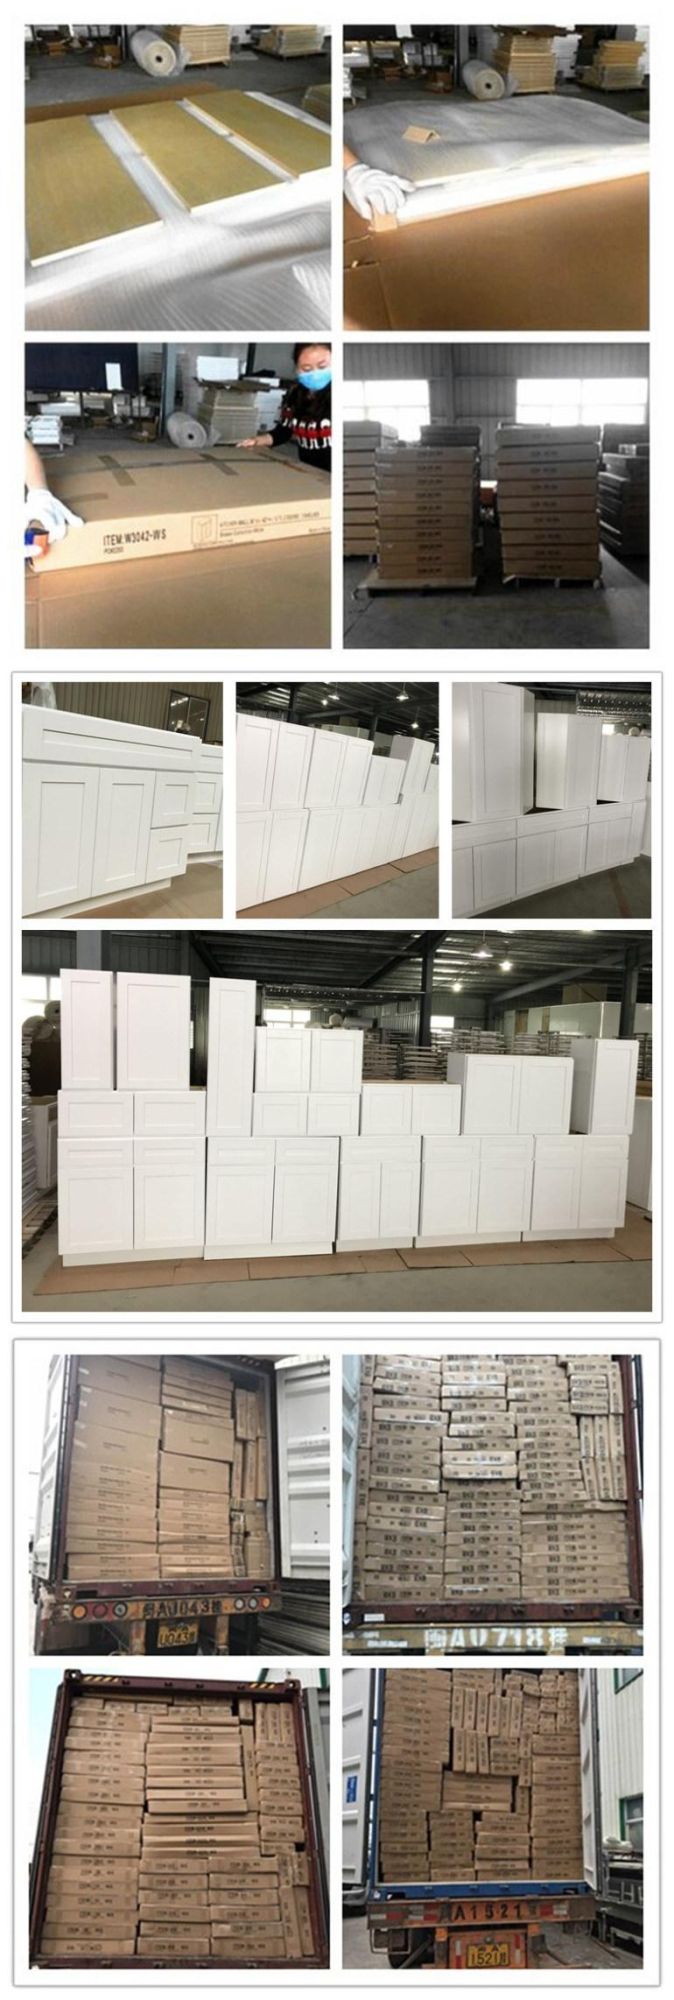 Canada Kitchen Cabinet Project for Wholesale